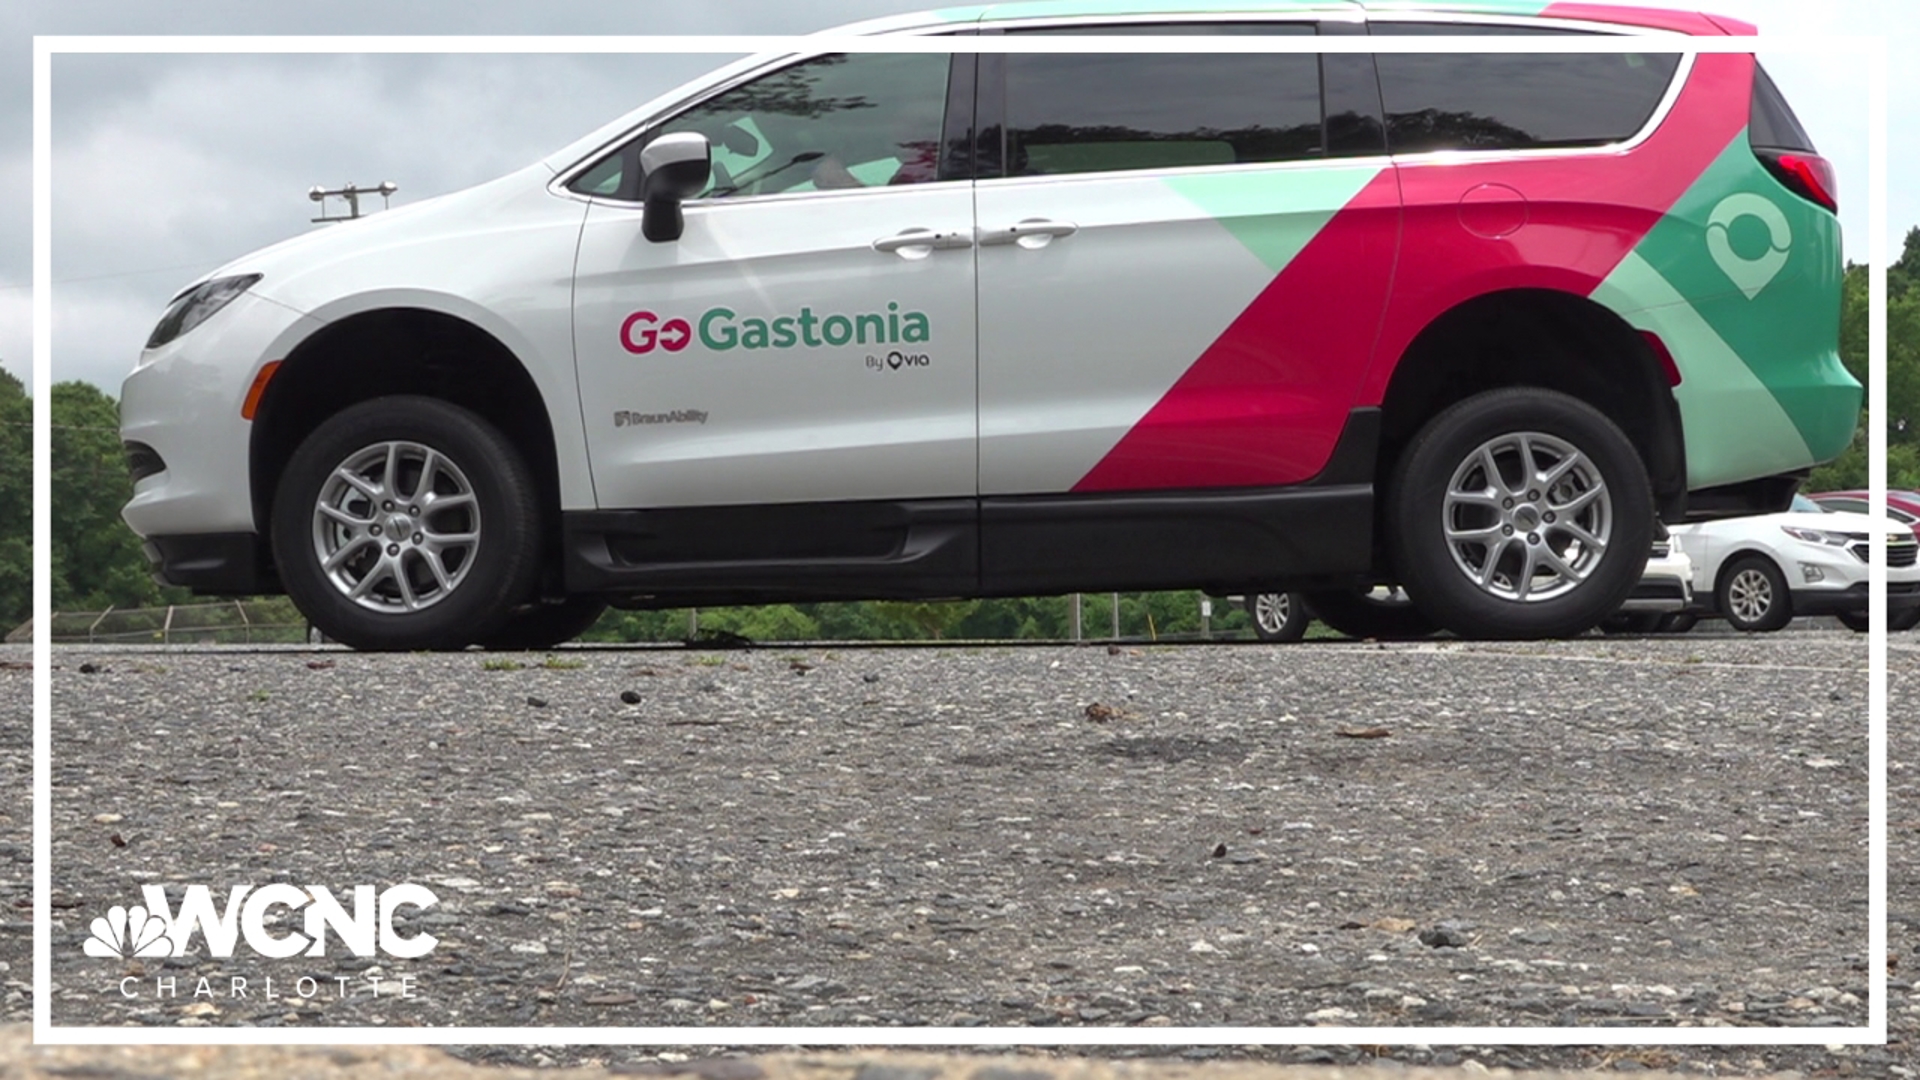 In just one week Gastonia's new rideshare service officially launches.